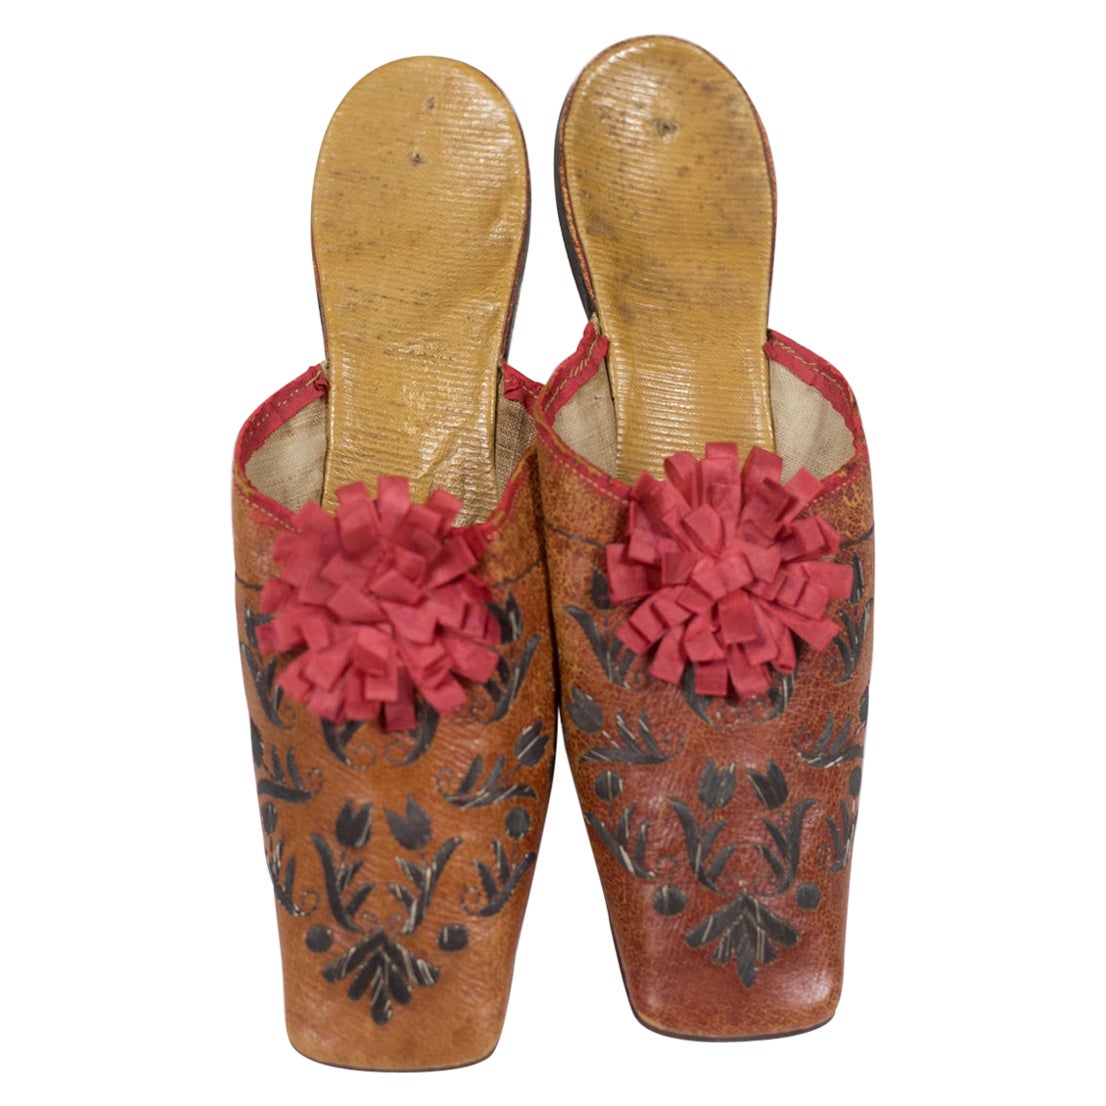 Pair Of Leather Slippers Embroidered With Tulips - France Early 19c